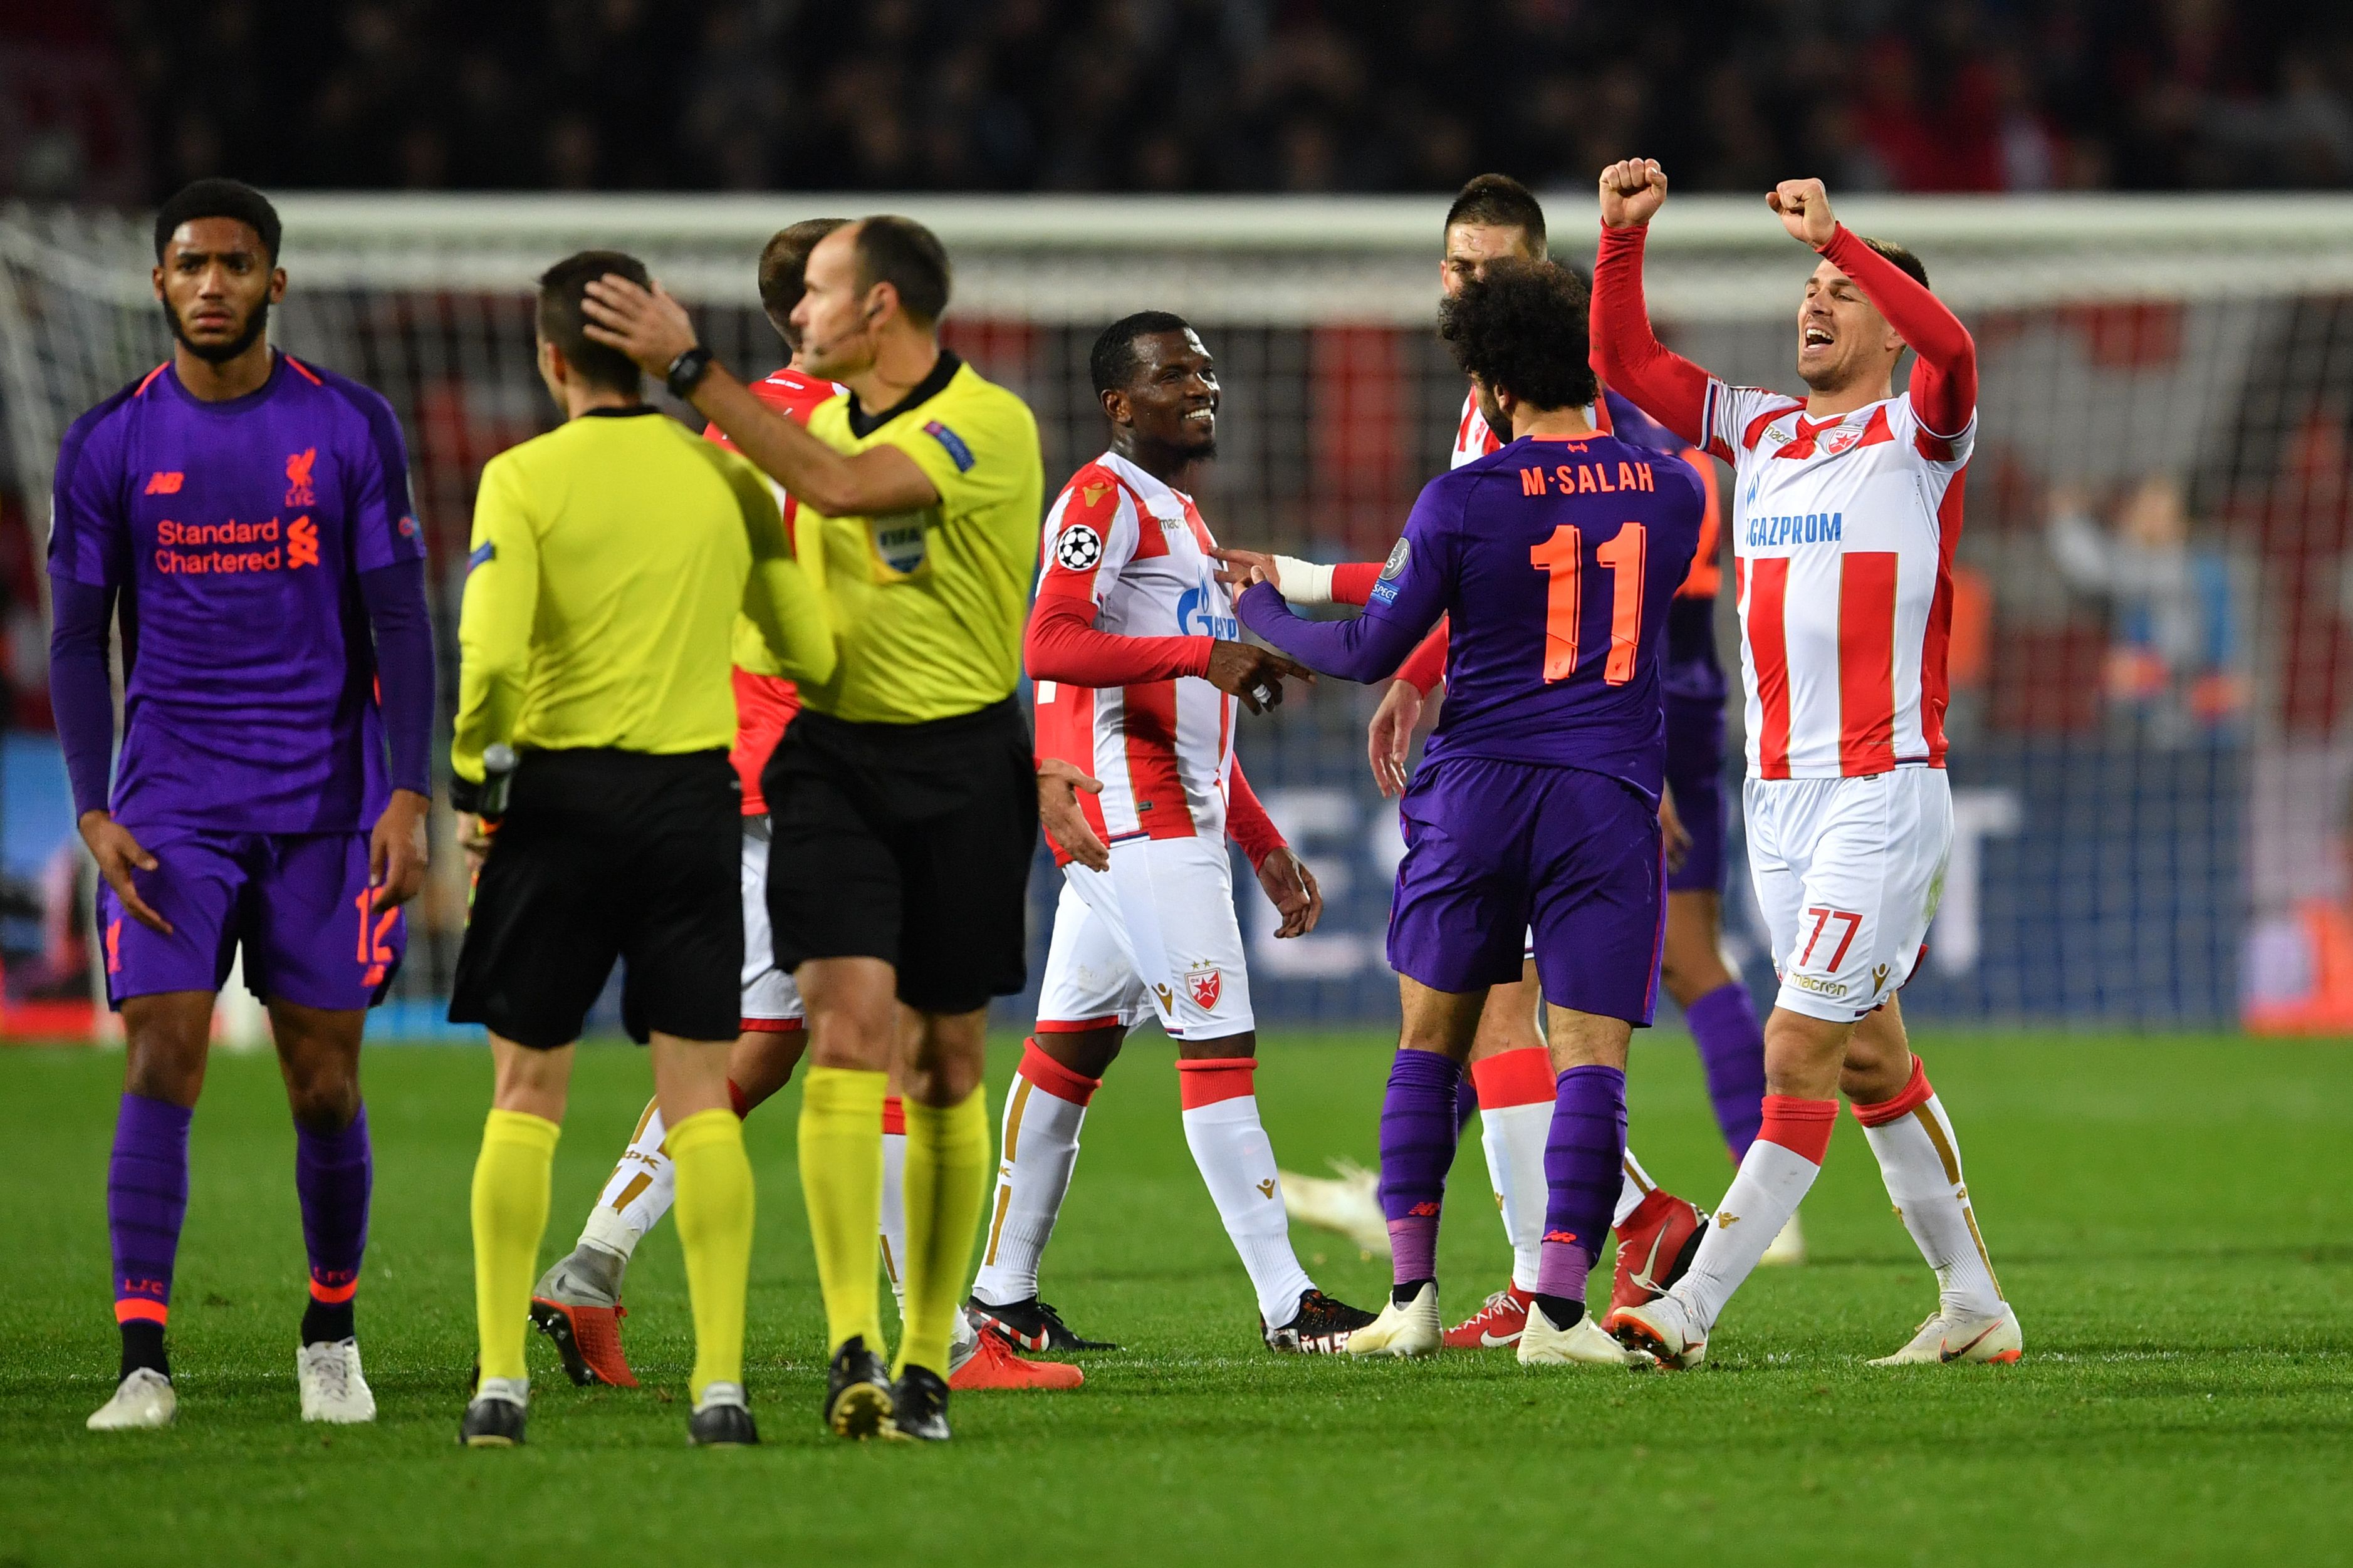 Red Star Belgrade's players and Liverpool's players react after the  UEFA Champions League Group C second-leg football match between Red Star Belgrade and Liverpool FC at the Rajko Mitic Stadium in Belgrade on November 6, 2018. (Photo by Andrej ISAKOVIC / AFP)        (Photo credit should read ANDREJ ISAKOVIC/AFP/Getty Images)